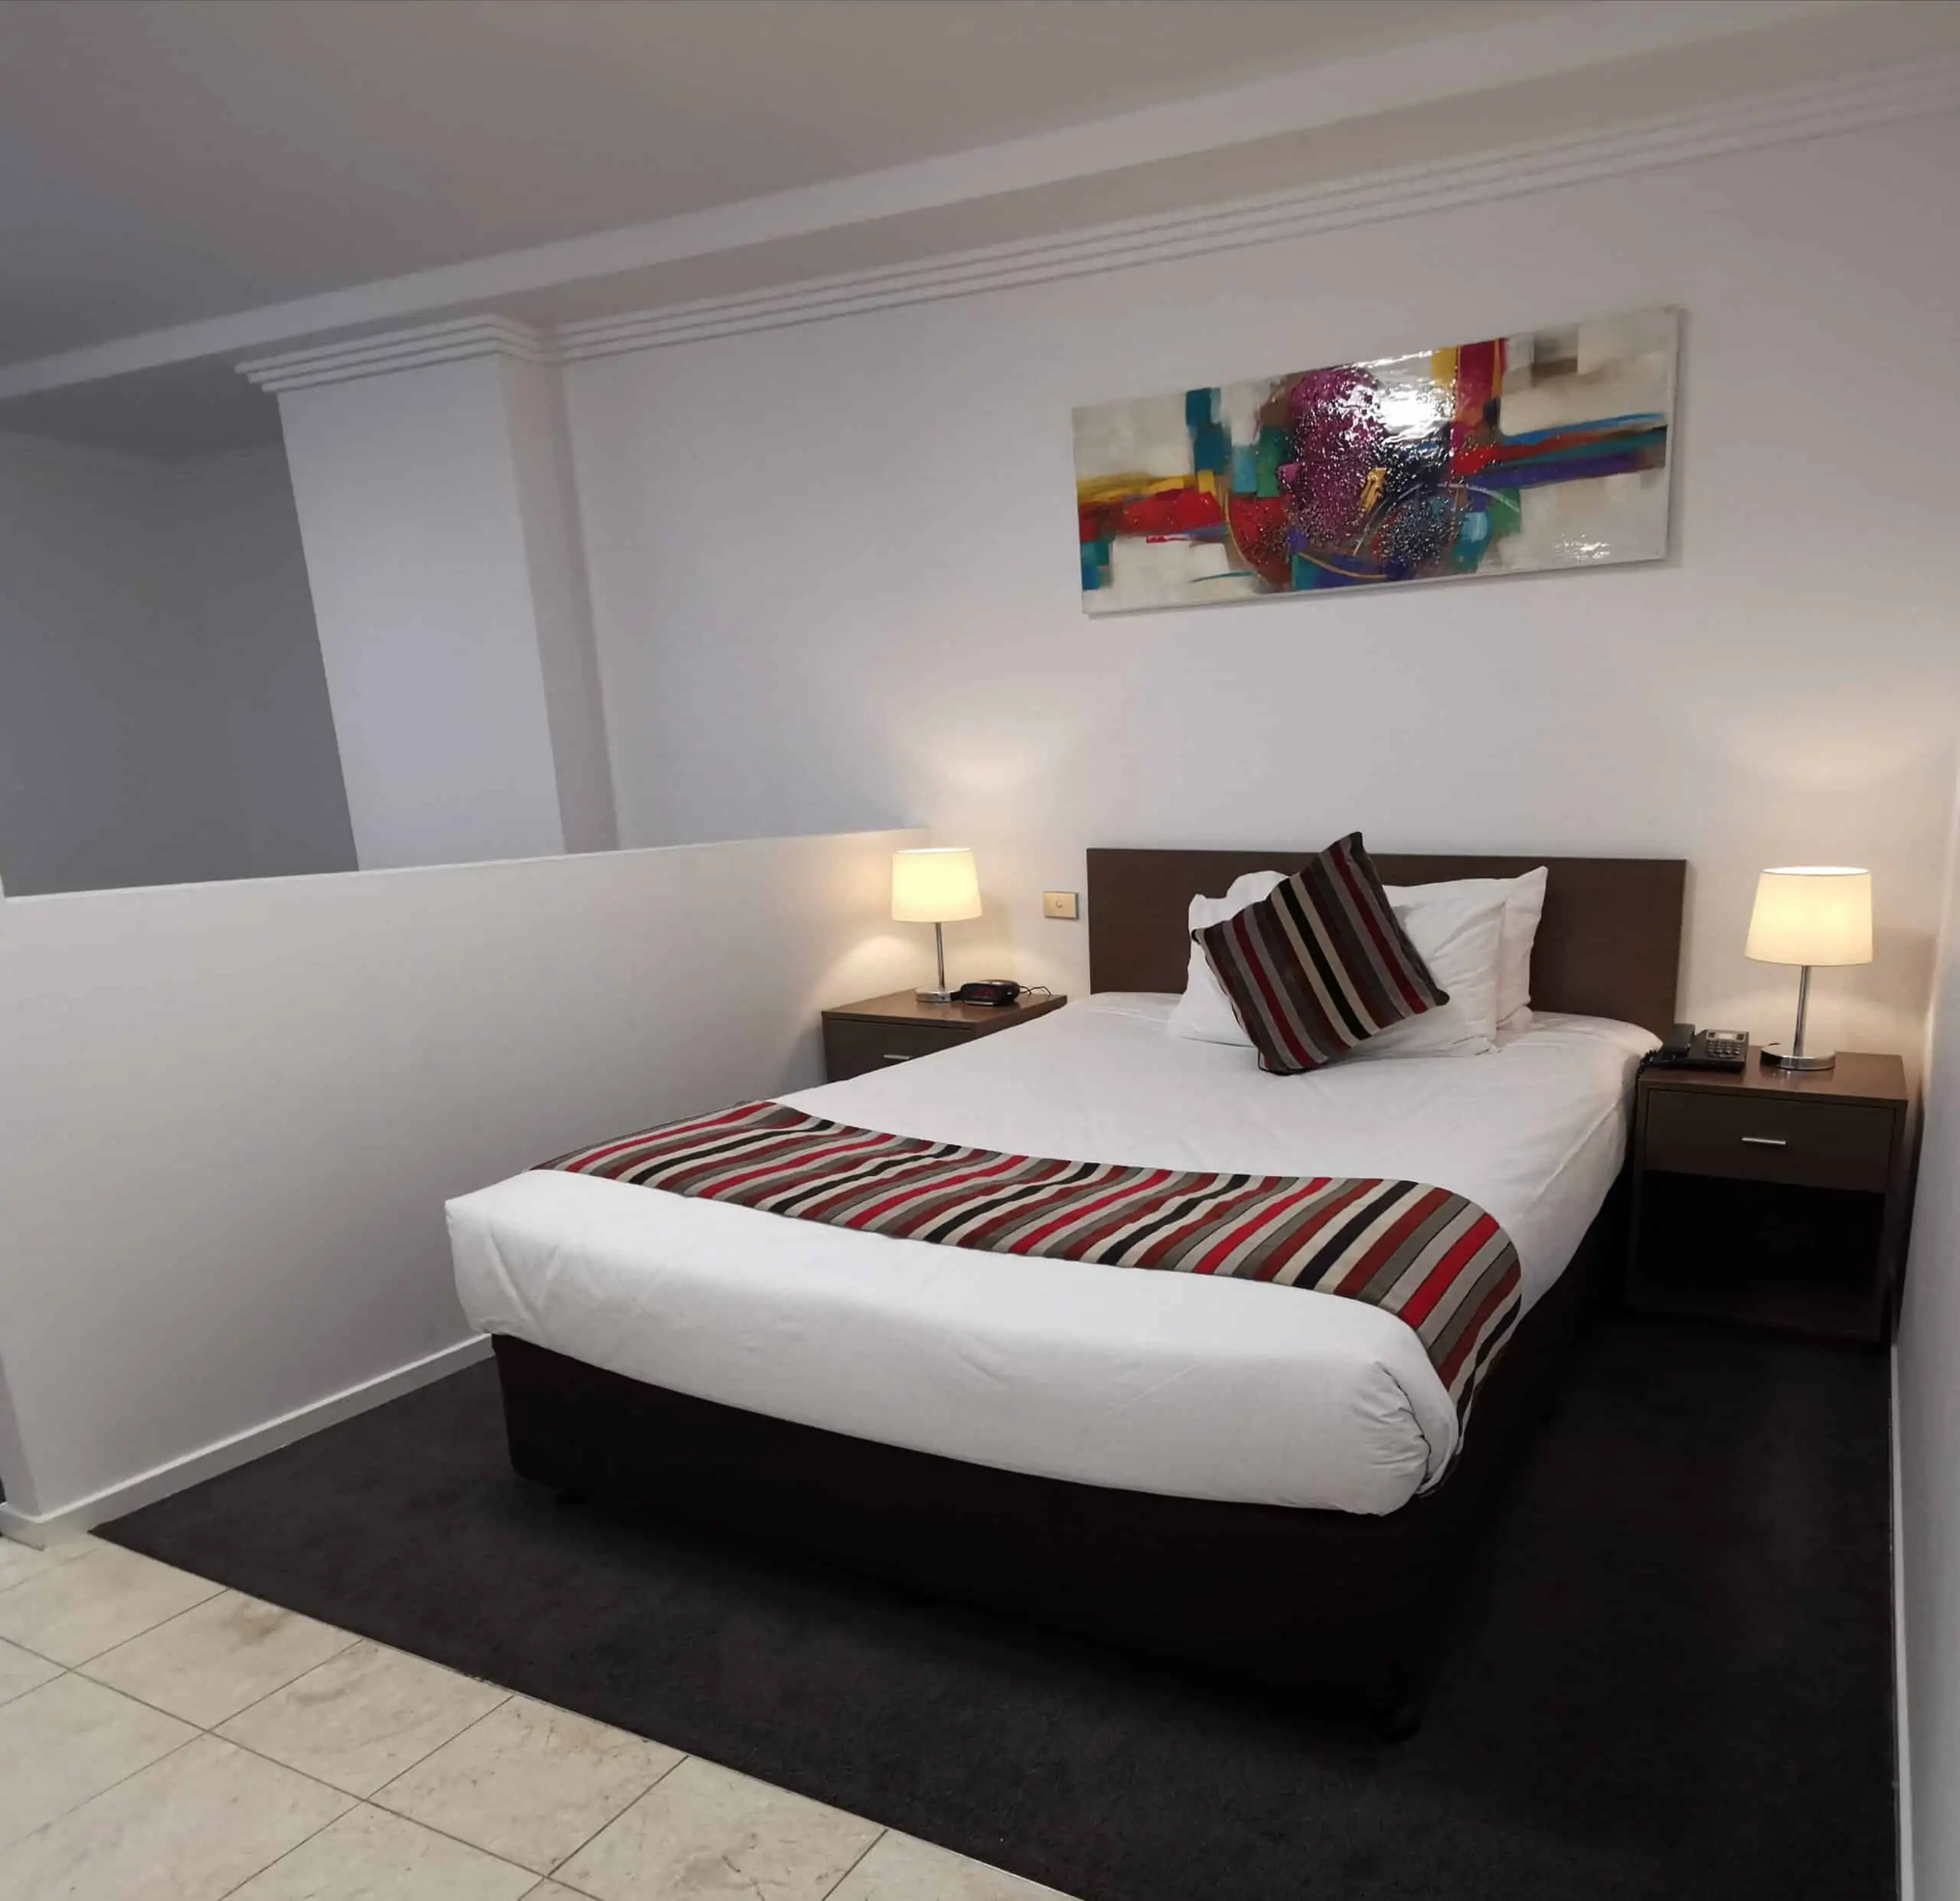 APX Hotels Apartments in Darling Harbour executive studio bedroom apartment in Sydney